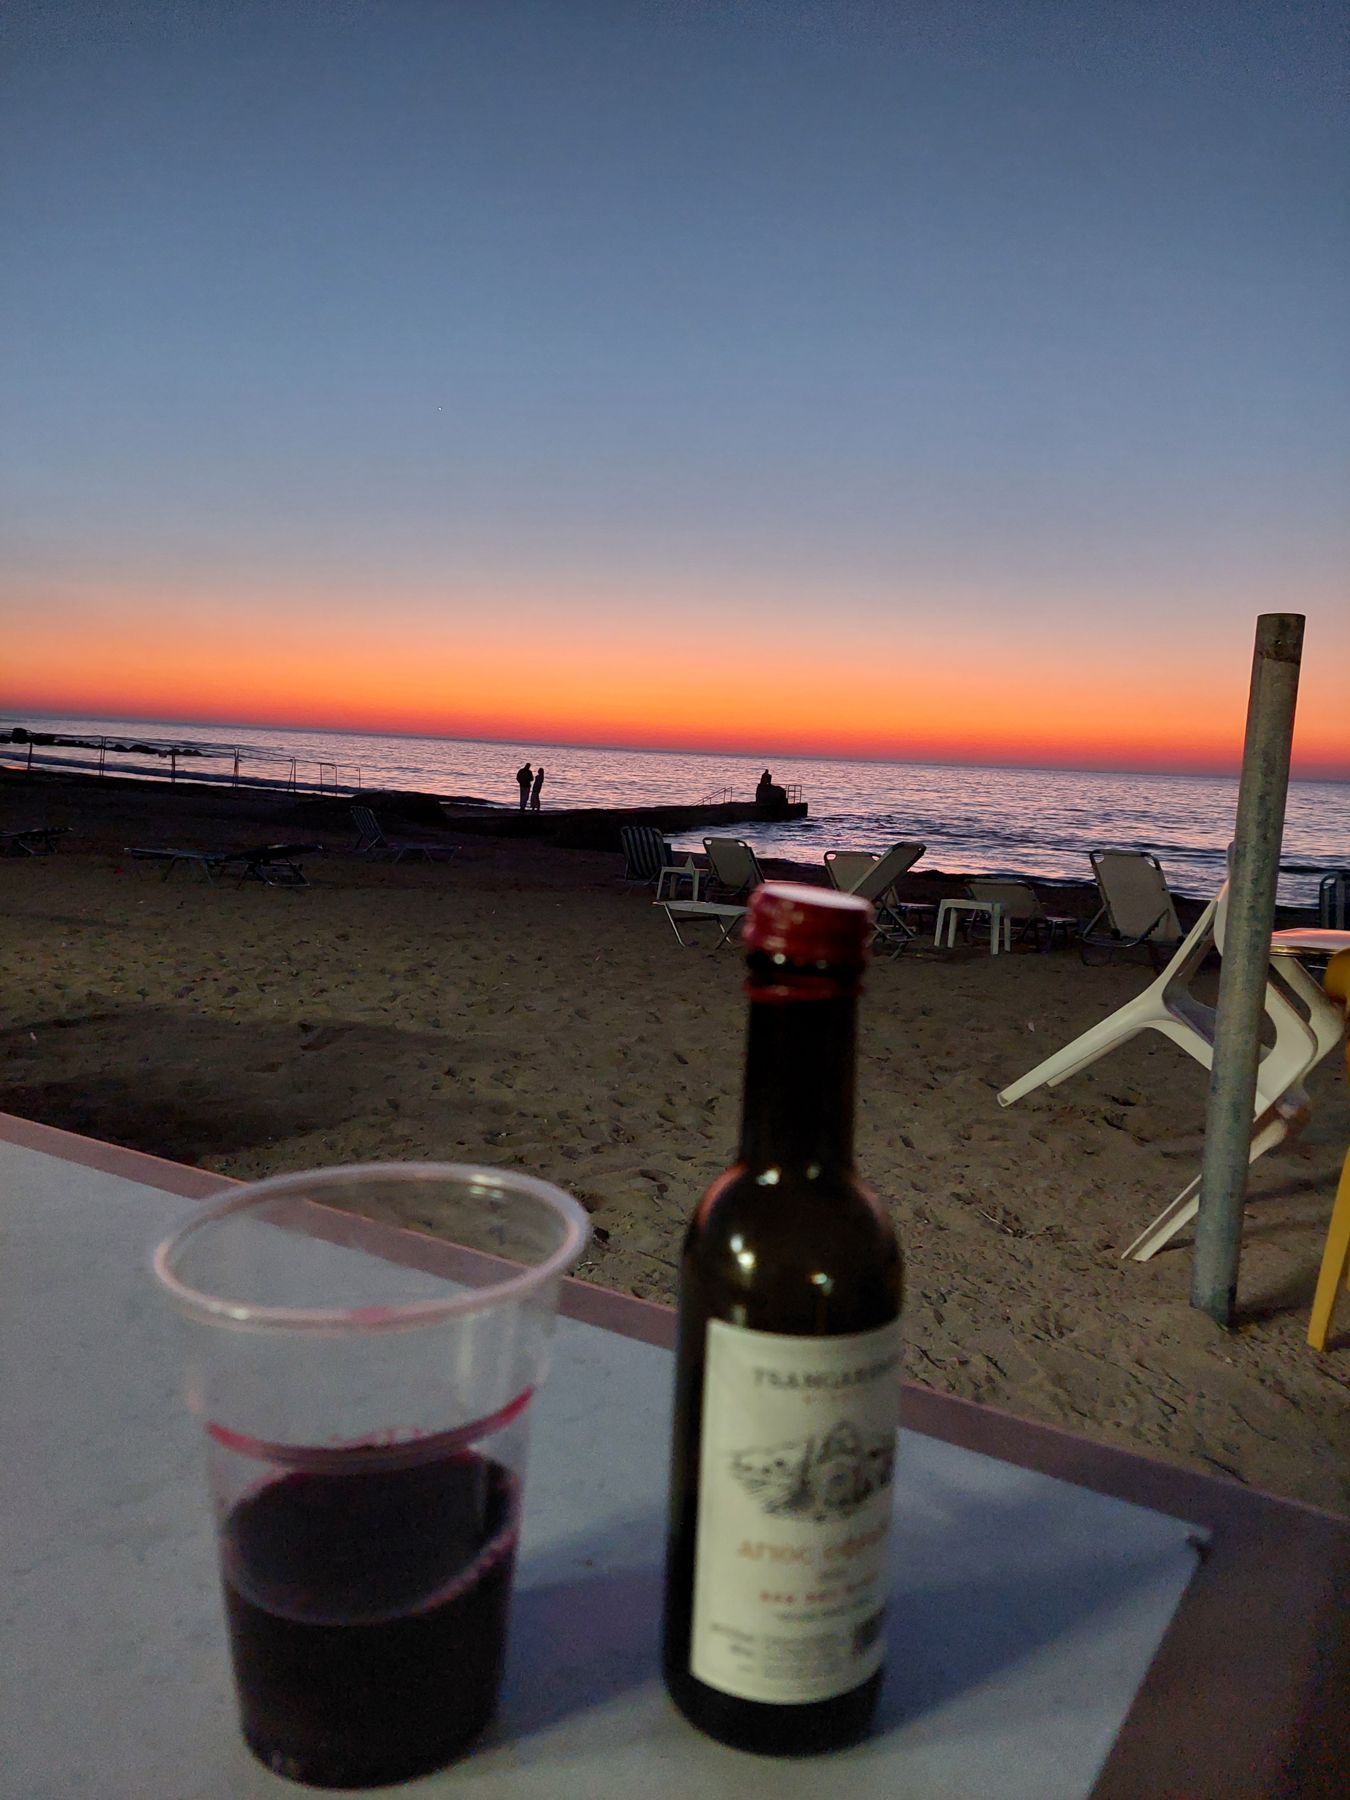 Cheap wine and a pricelss sunset